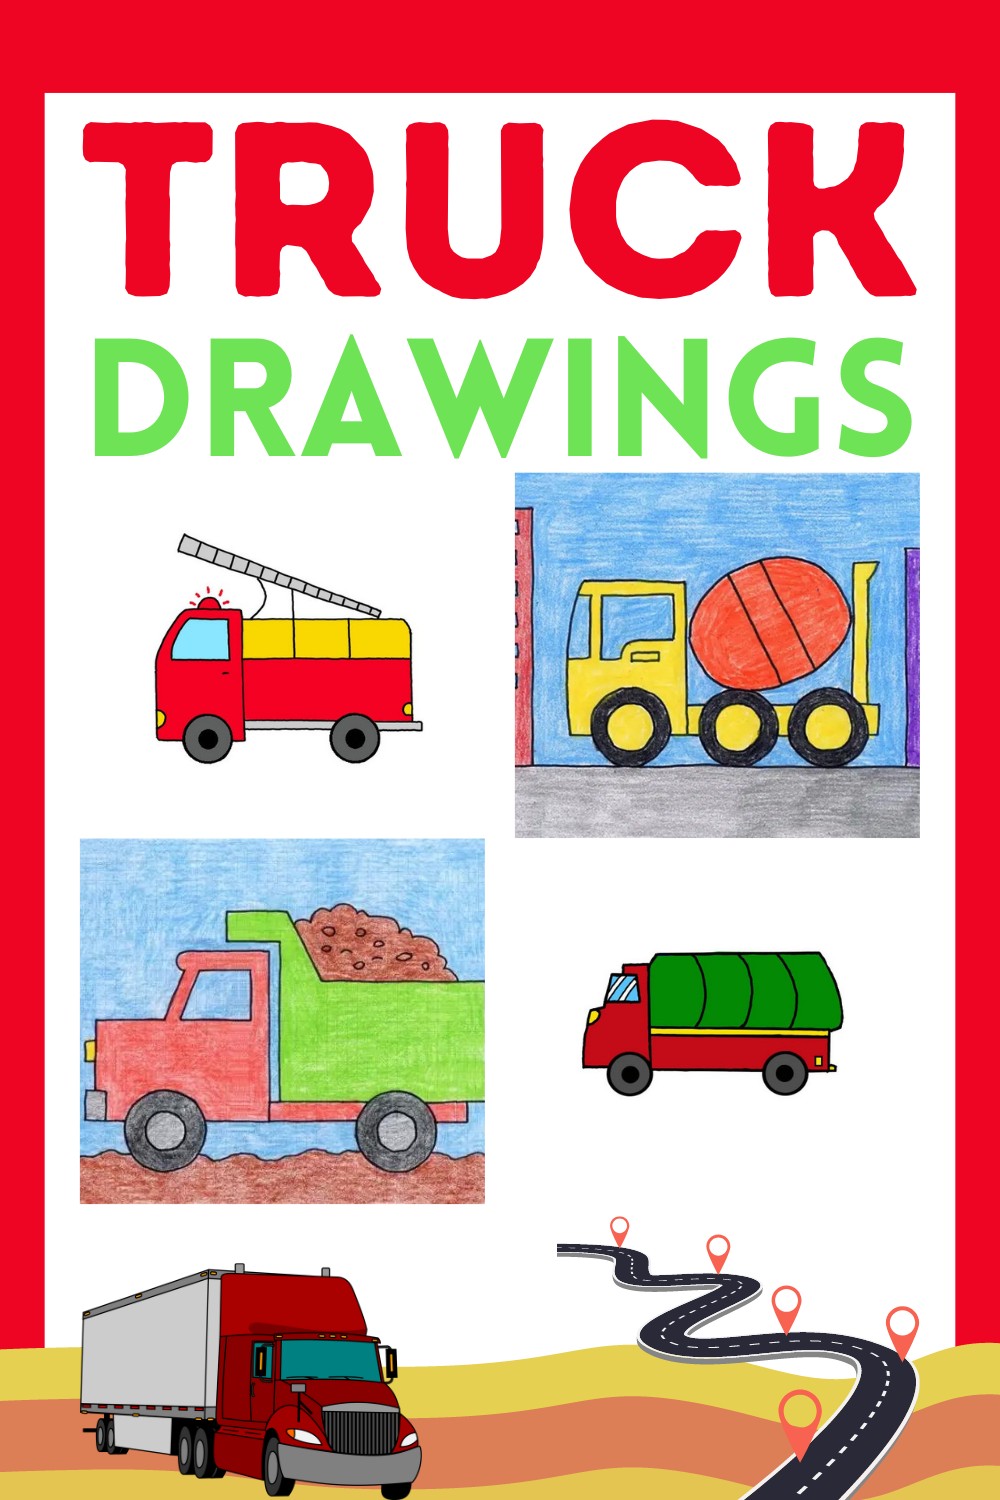 How to Draw a Truck - Create a Sleek and Modern Truck Drawing